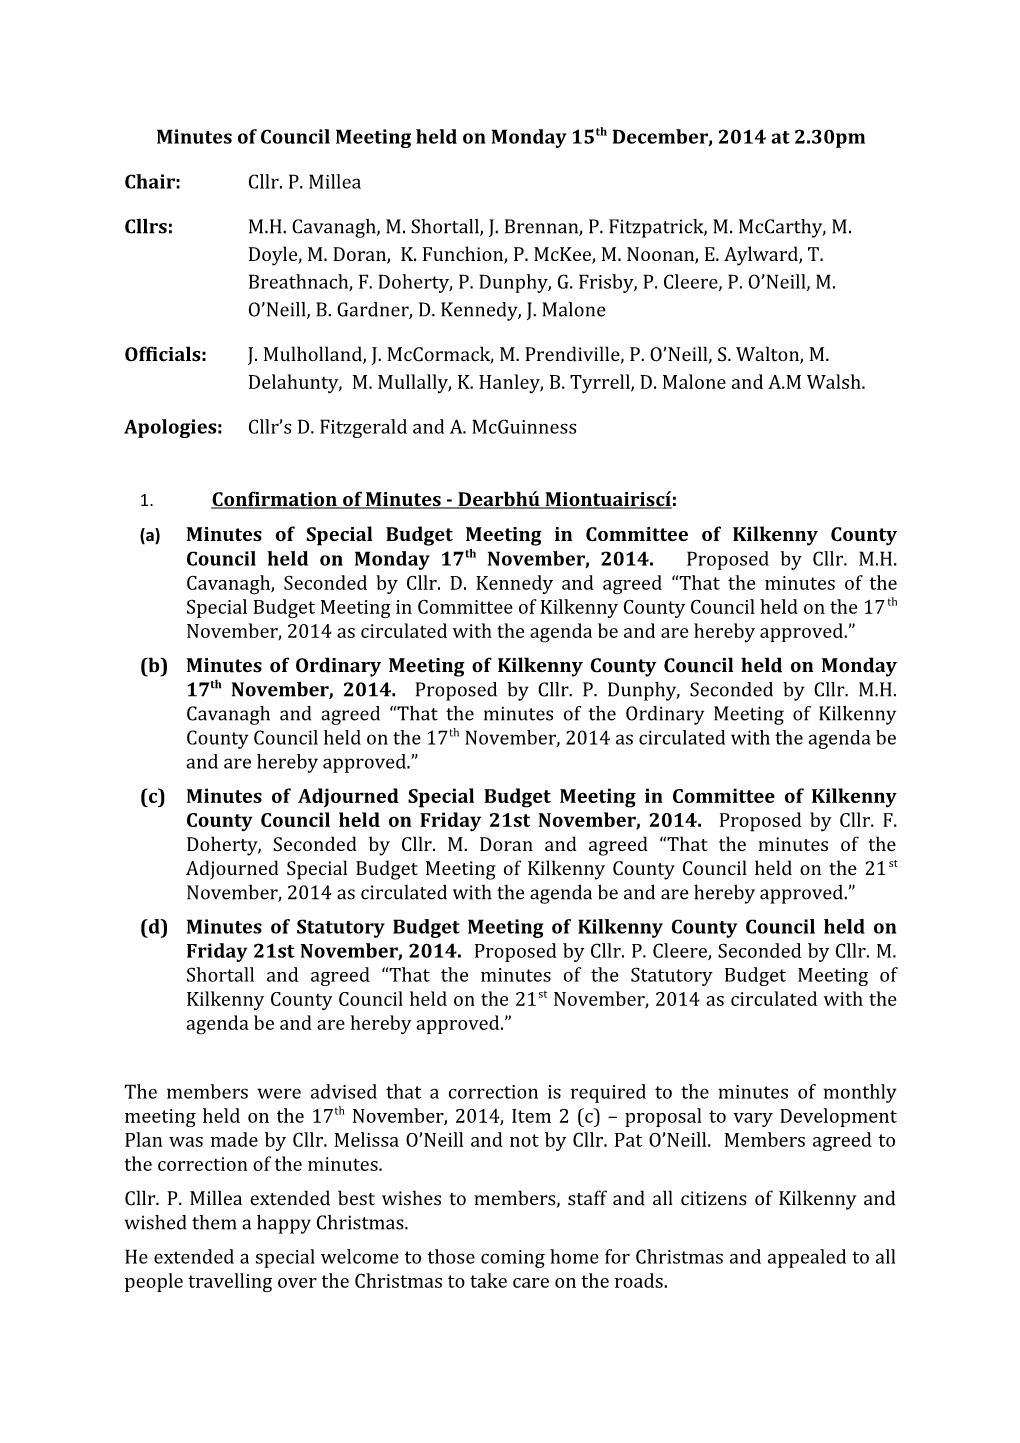 Minutes of Council Meeting Held on Monday 15Th December, 2014 at 2.30Pm